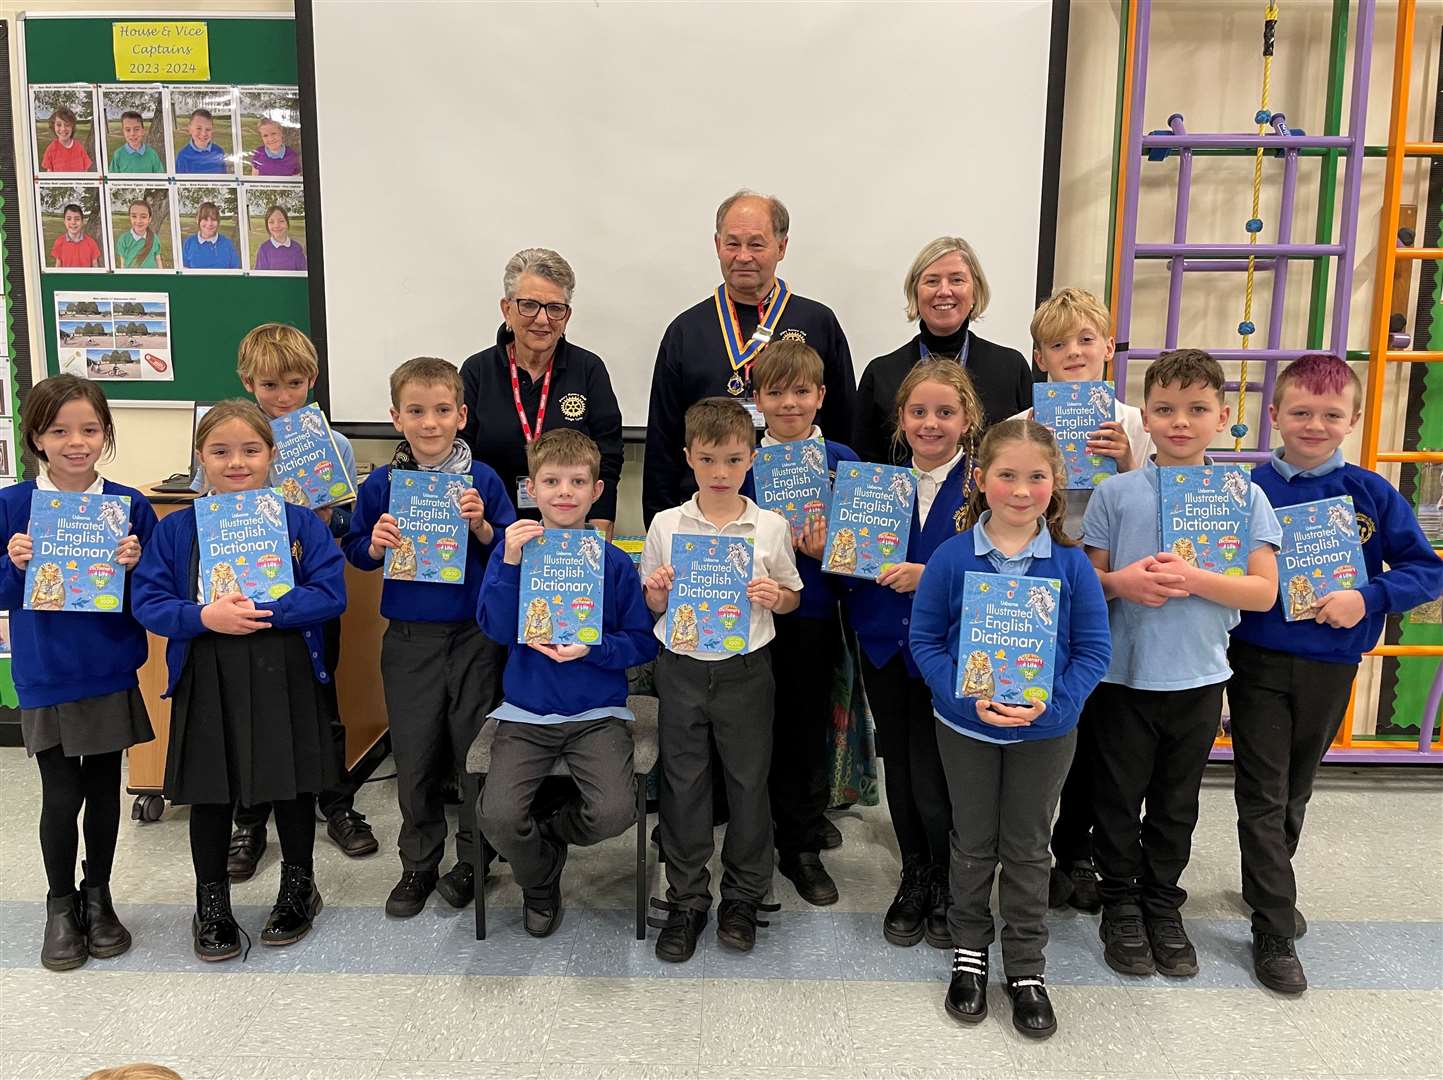 Priory President Paul Batterham and Elizabeth Eagling with Head Teacher Jennie Wildsmith-Garton presenting the dictionaries to the Year 4 pupils